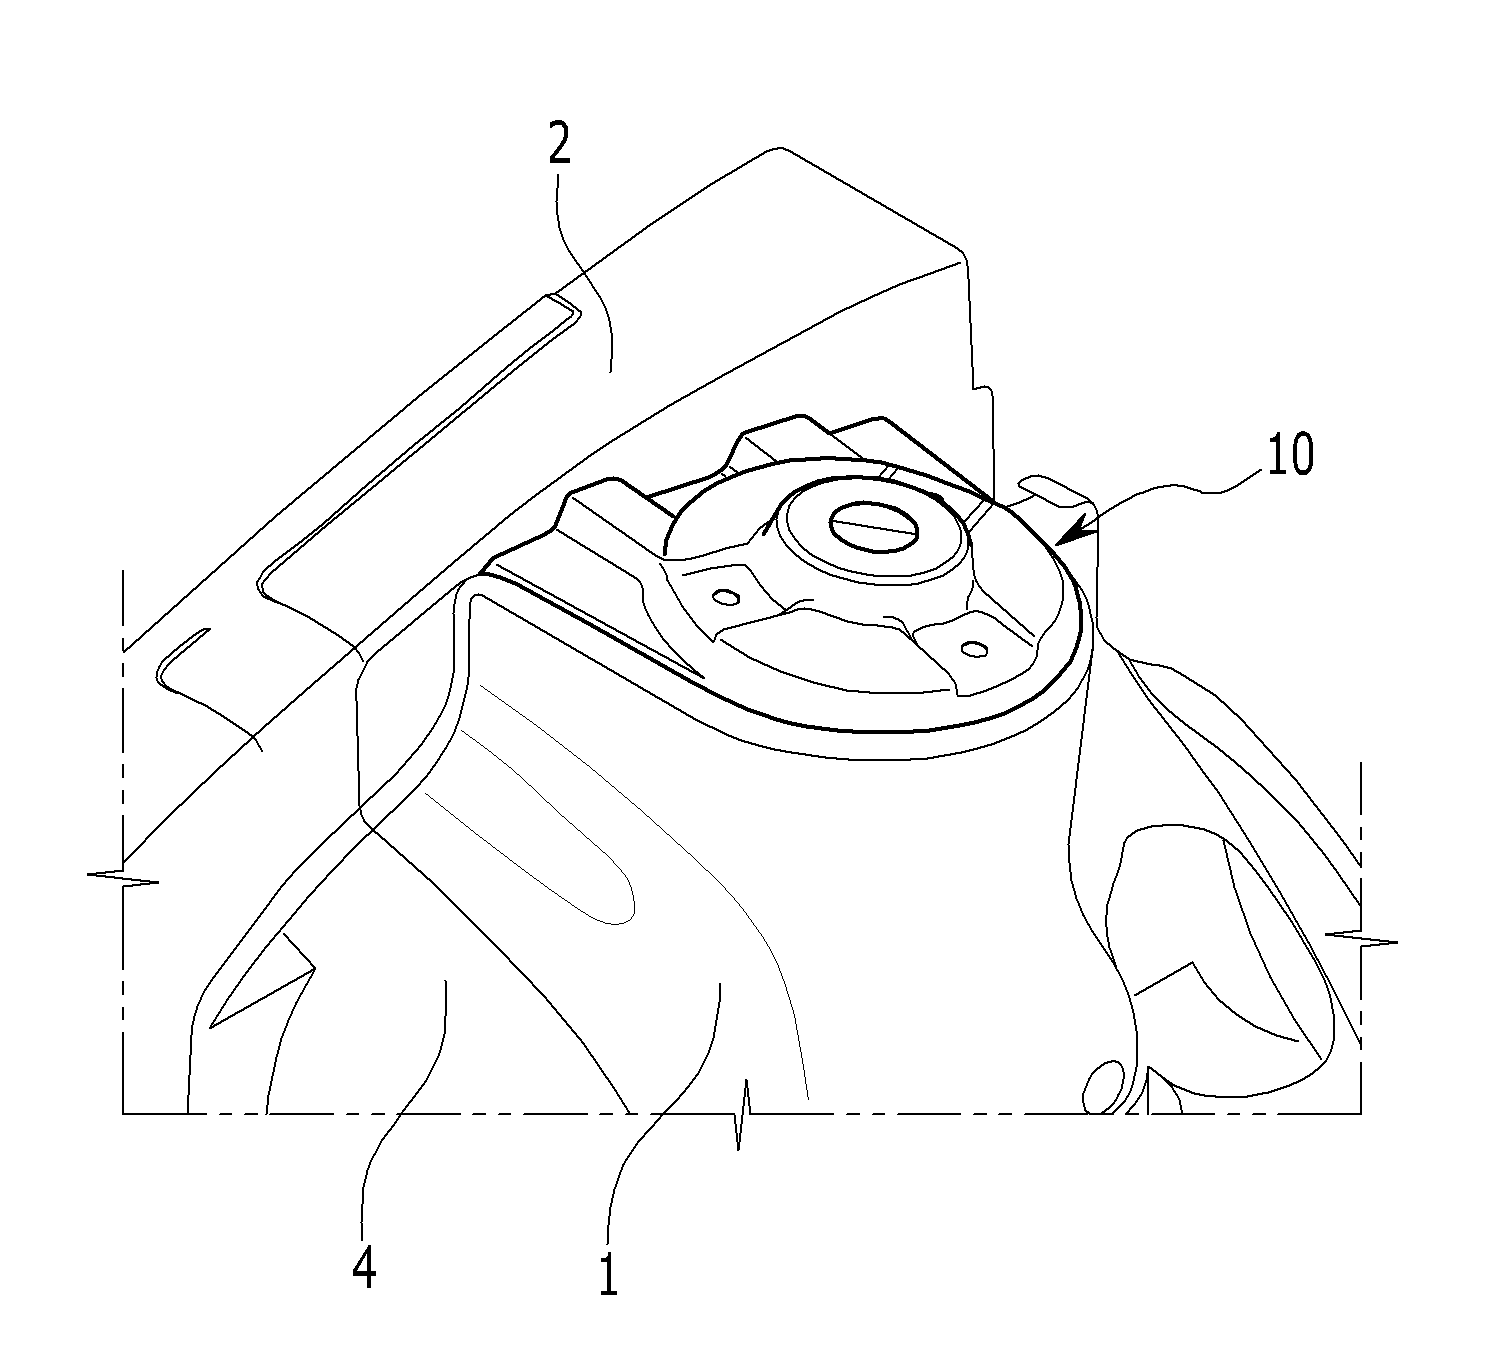 Shock absorber housing for vehicle